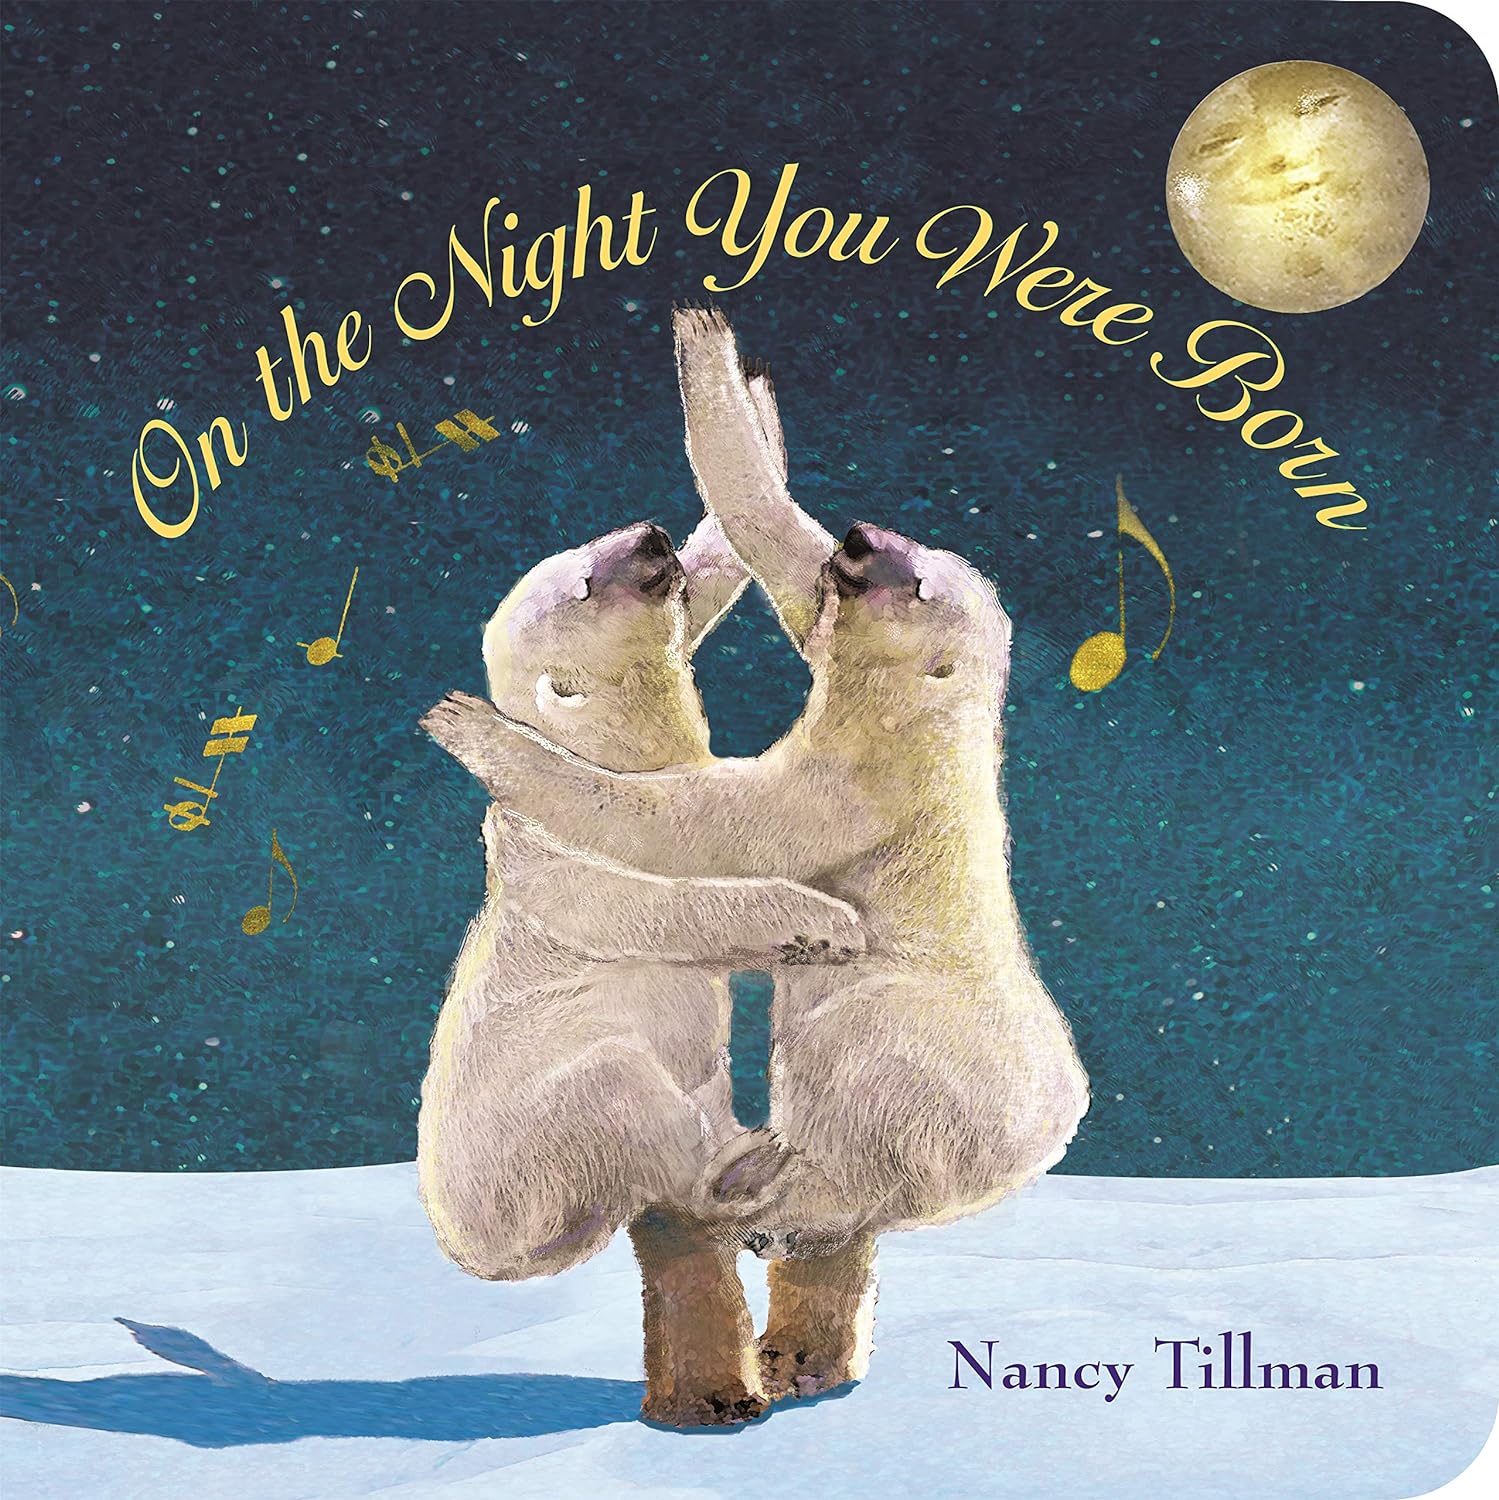 On the Night You Were Born- famous children's books